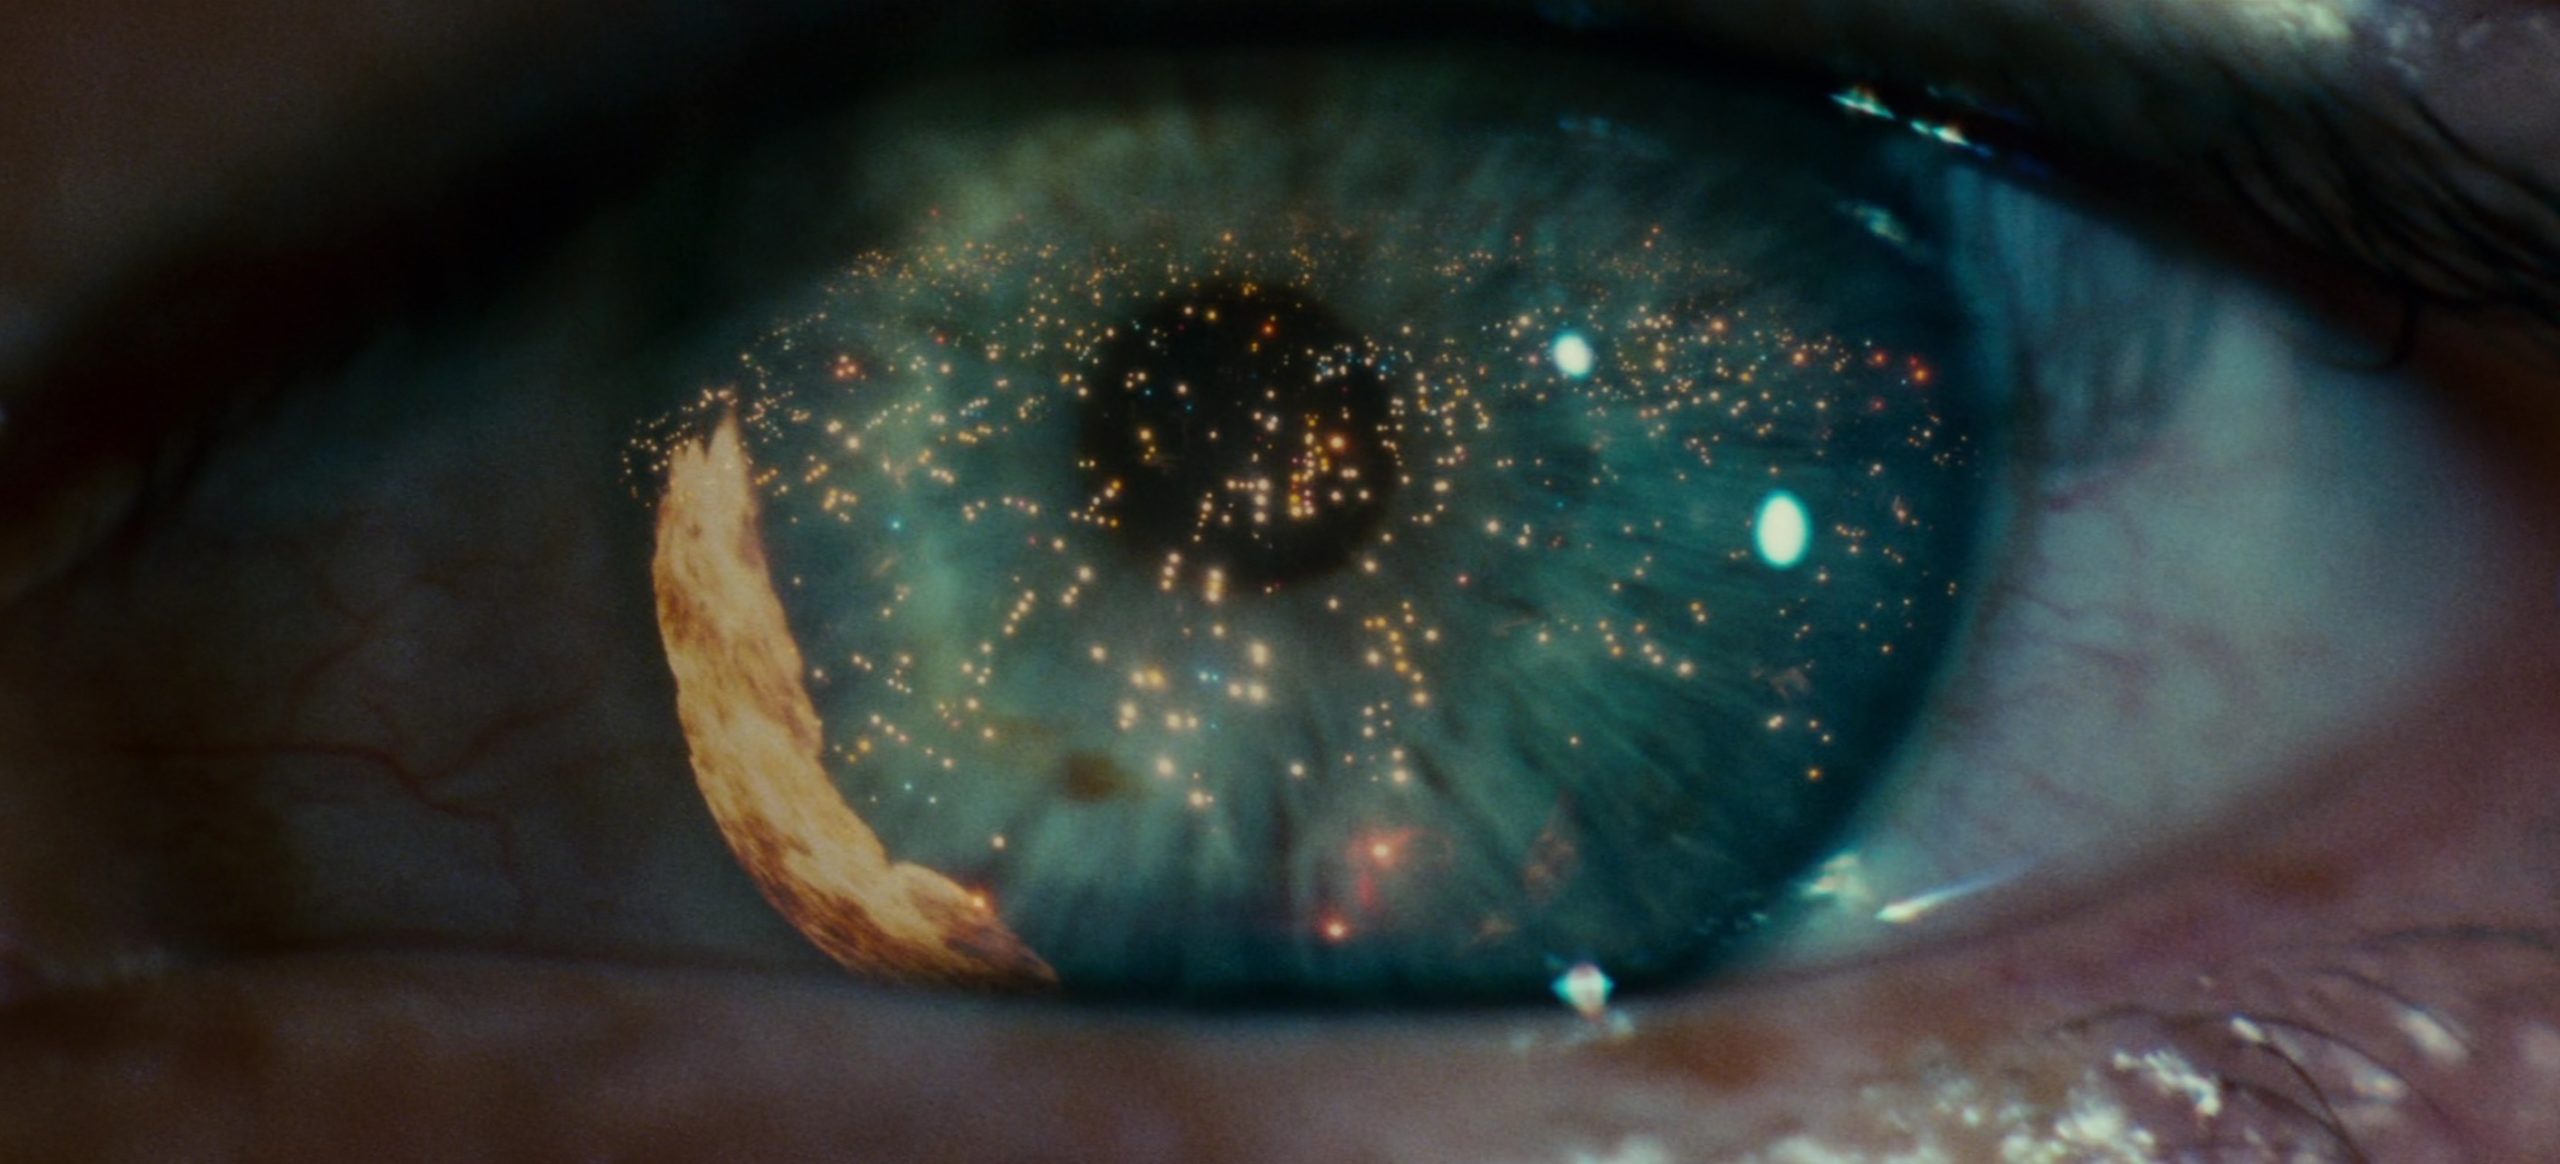 We Made Two People Watch Blade Runner for The First Time, And Here’s What They Thought